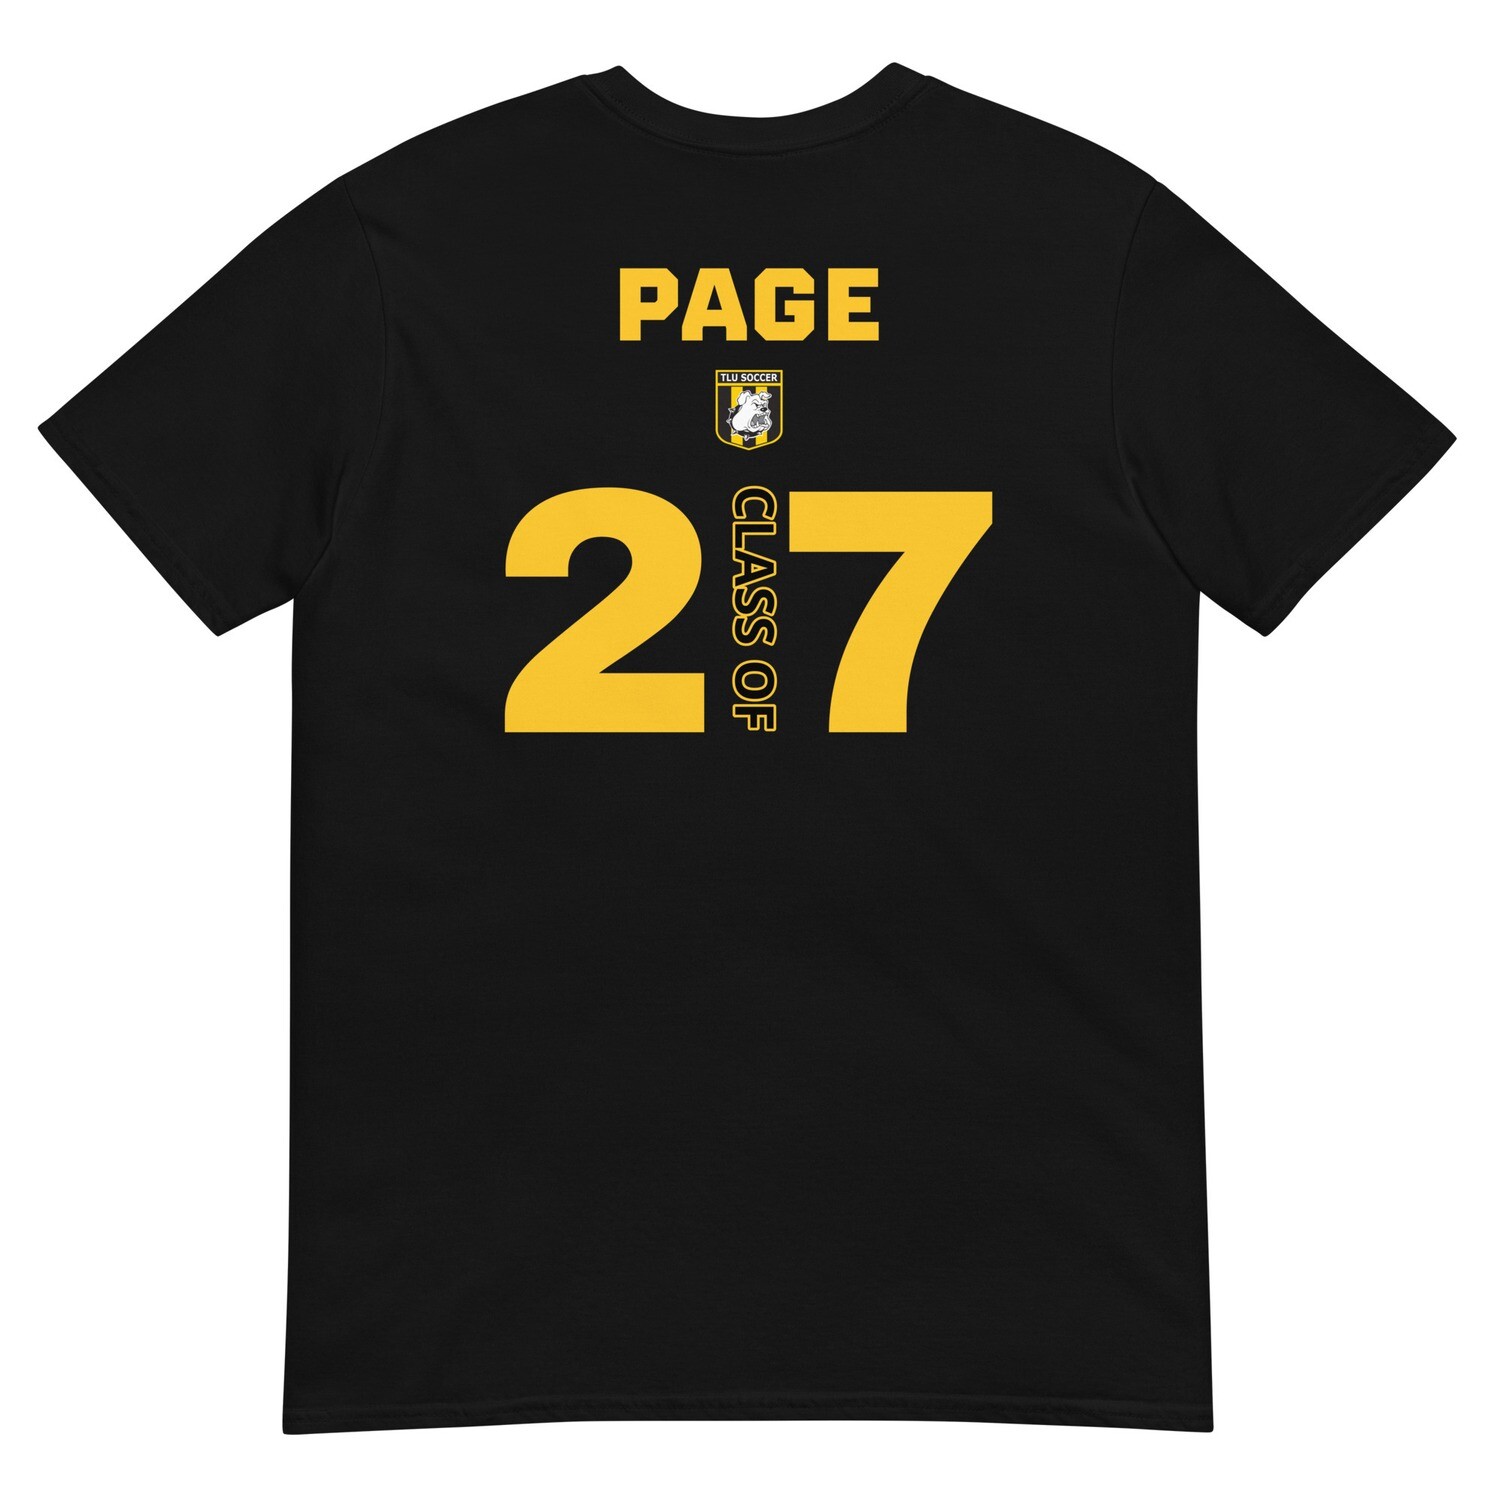 MSOC Page Class of 2027 Short-Sleeve Unisex T-Shirt